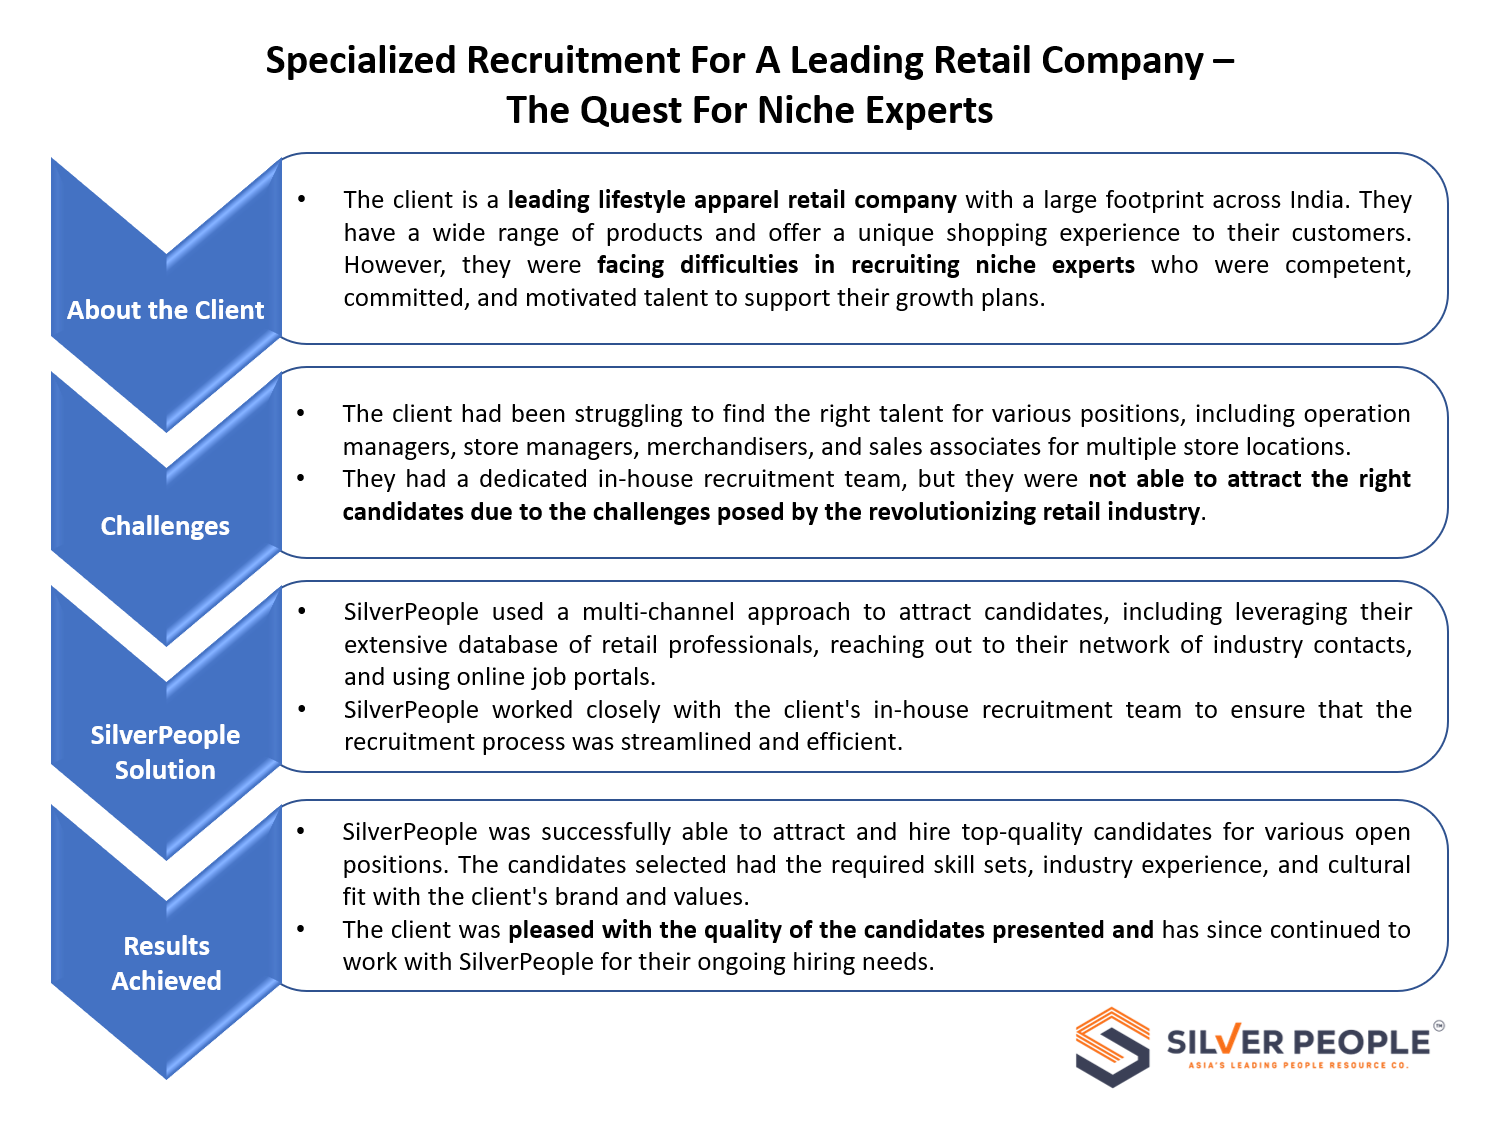 Specialized Recruitment for a Leading Retail Company - The Quest for Niche Experts